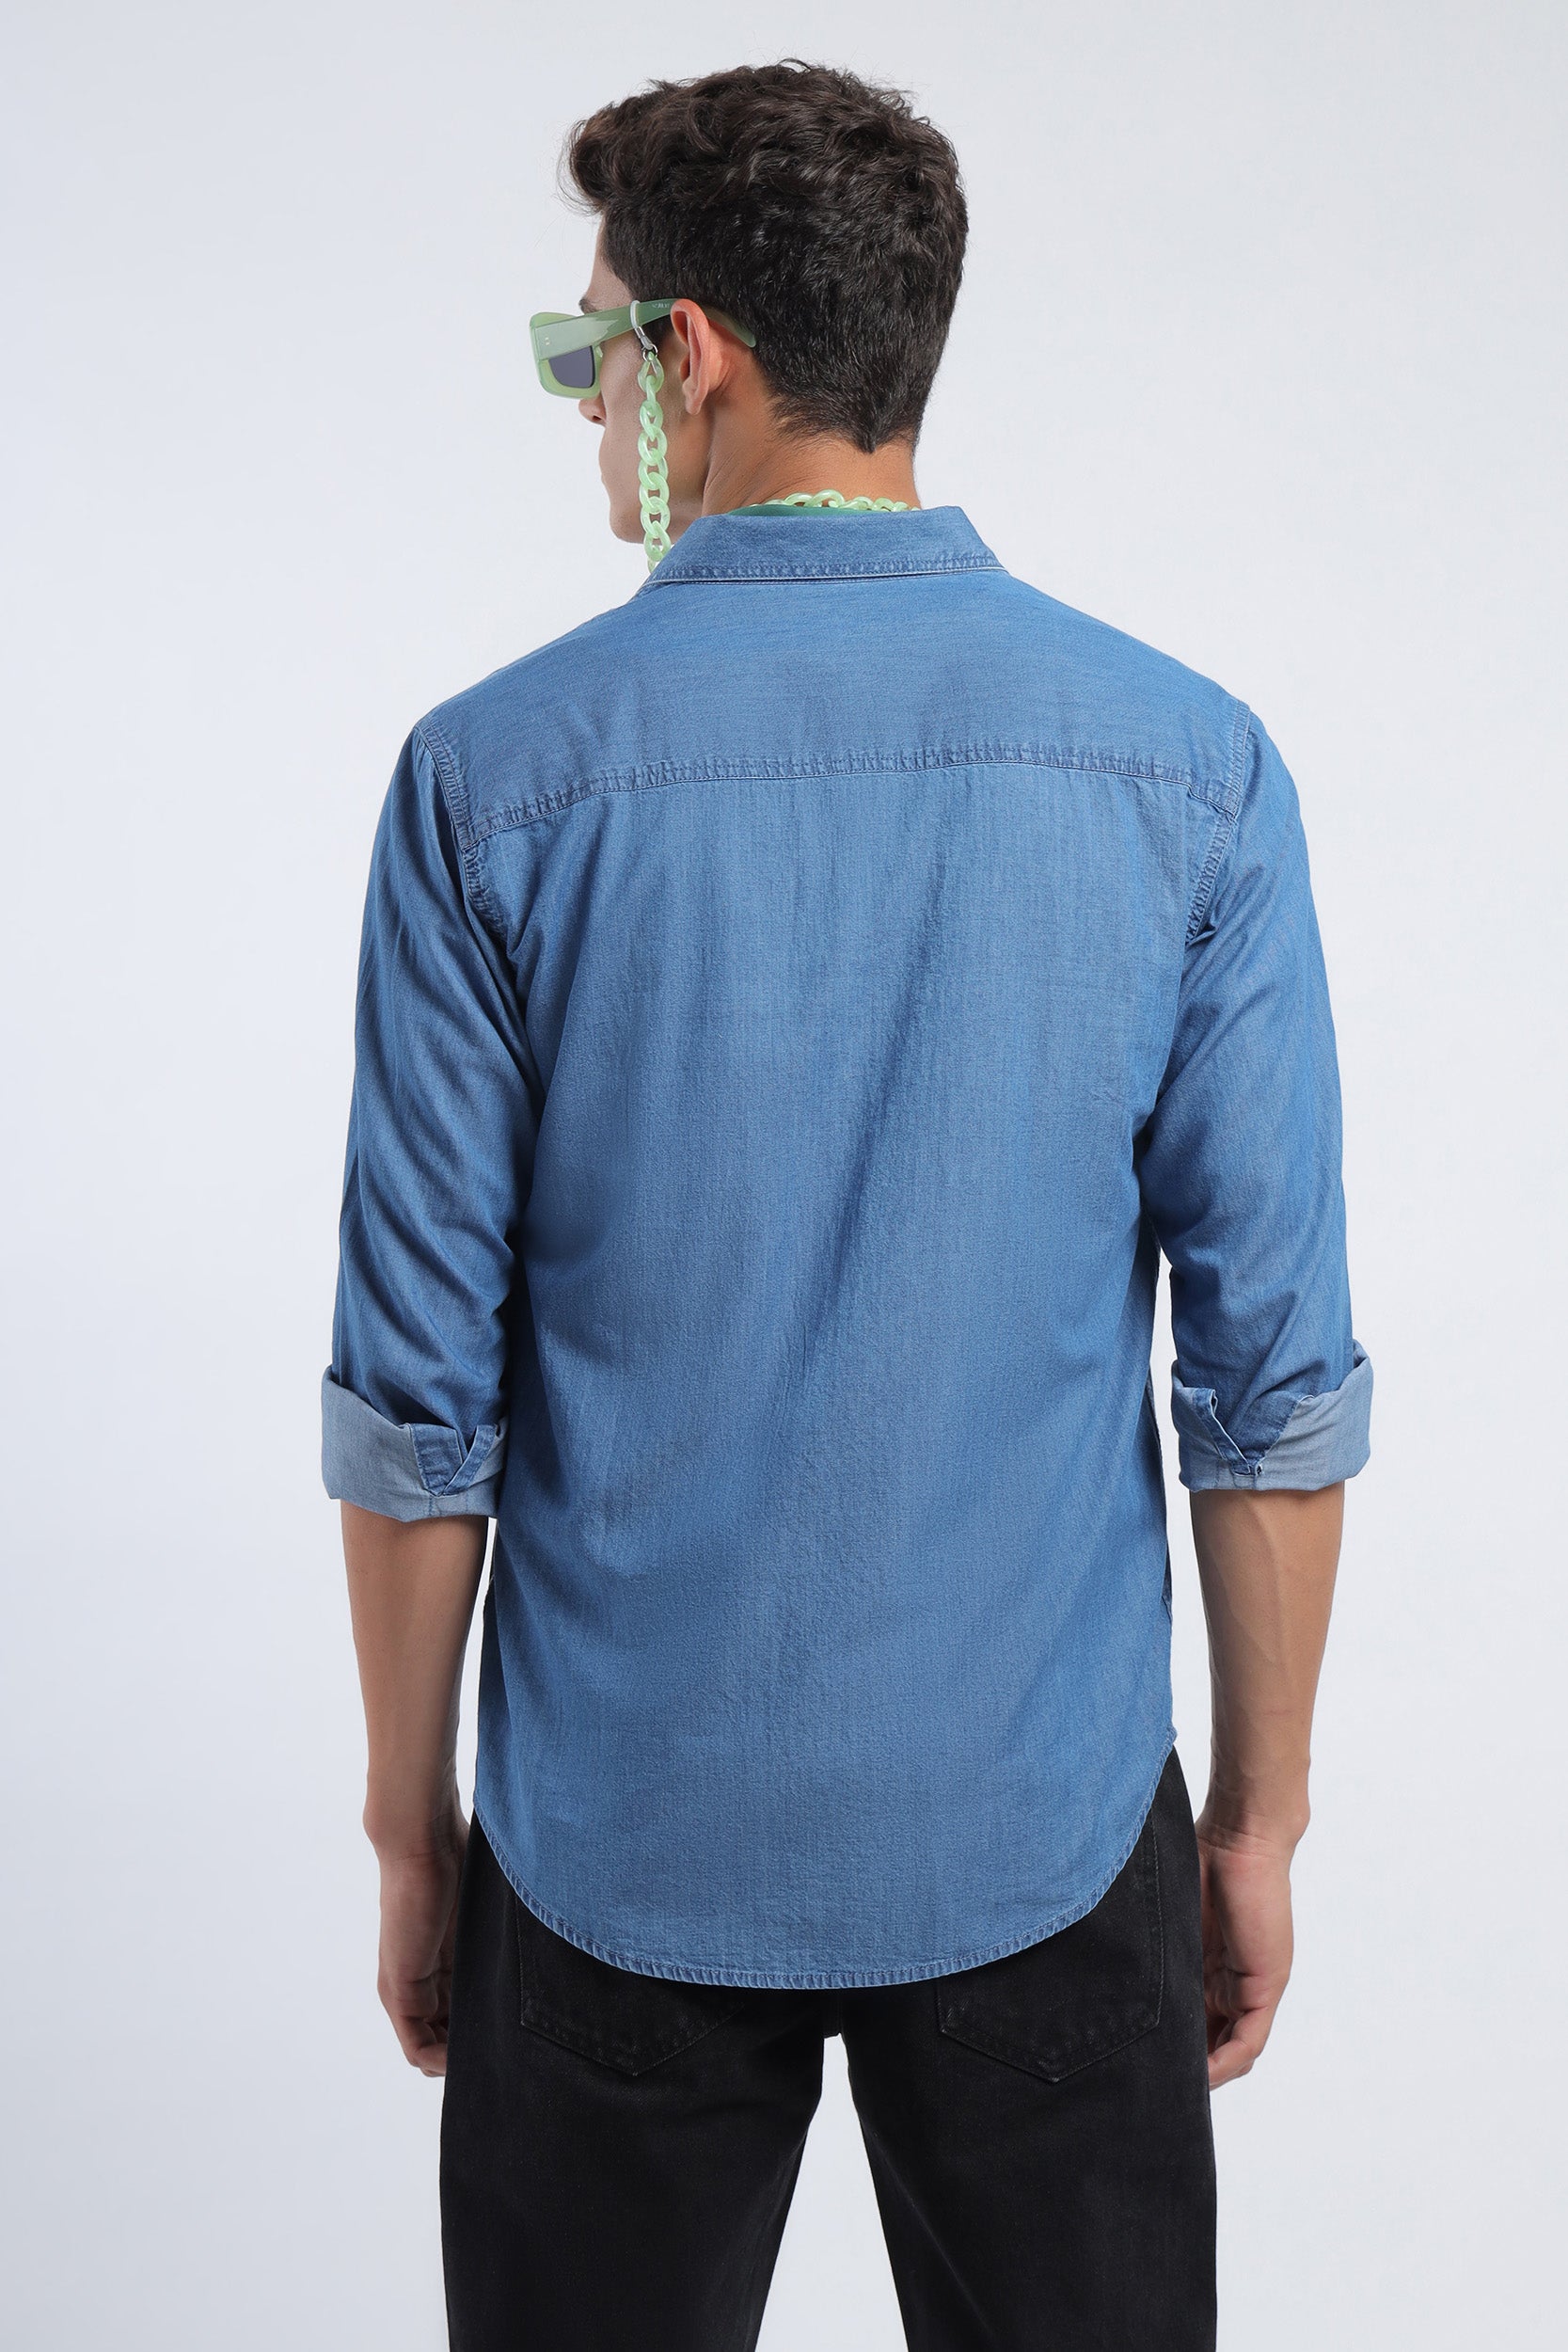 Buy The Roadster Lifestyle Co Men Blue Regular Fit Faded Casual Denim Shirt  - Shirts for Men 10398405 | Myntra